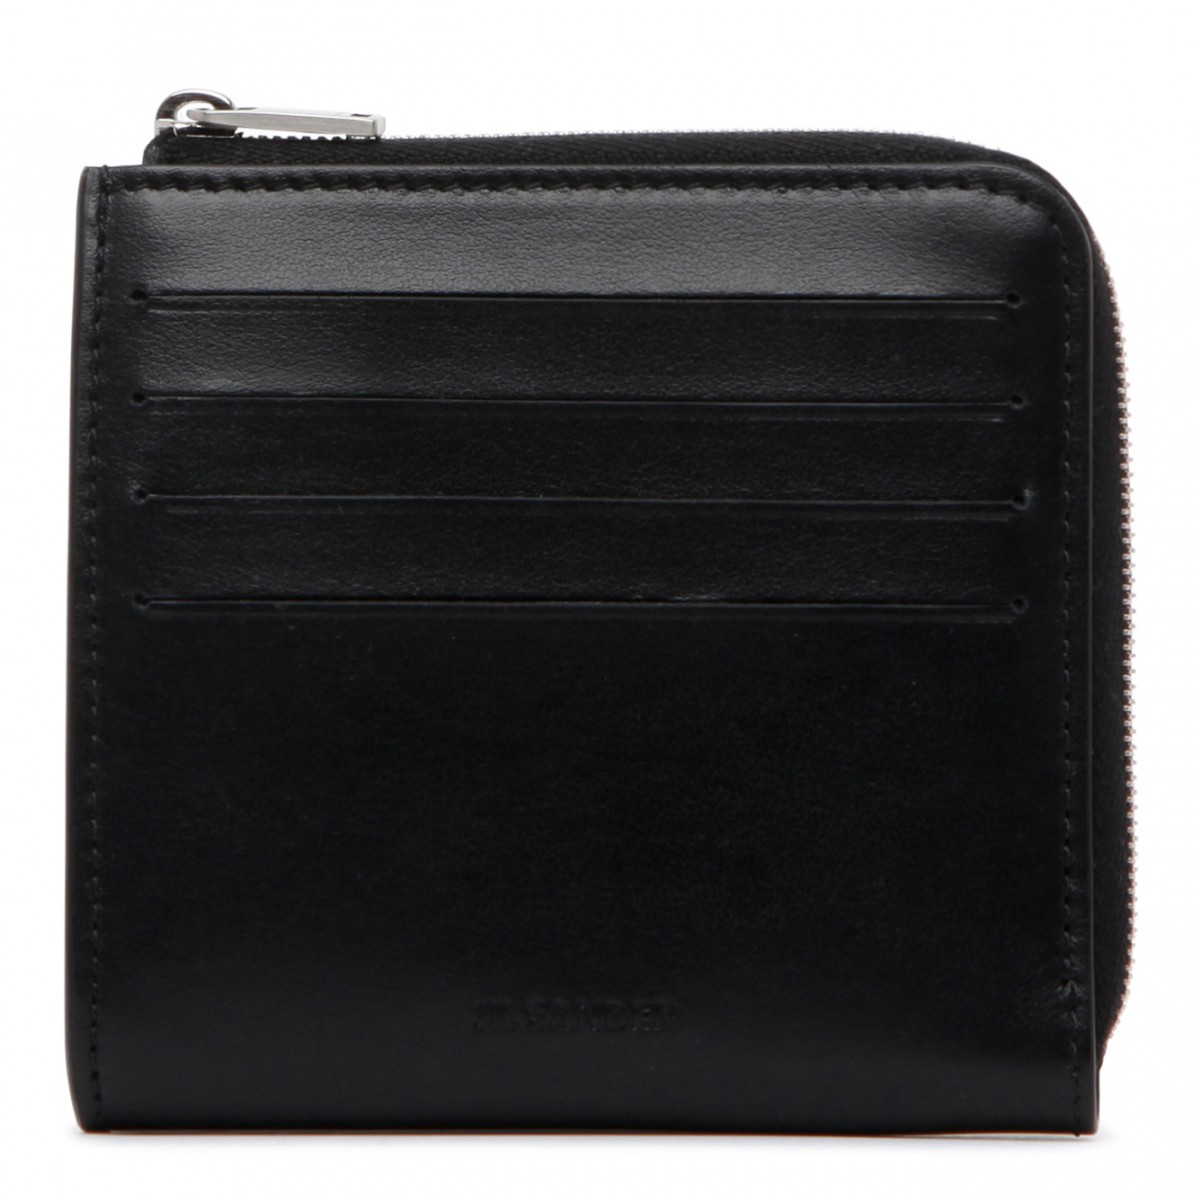 Black Calf Leather Single Compartment Wallet